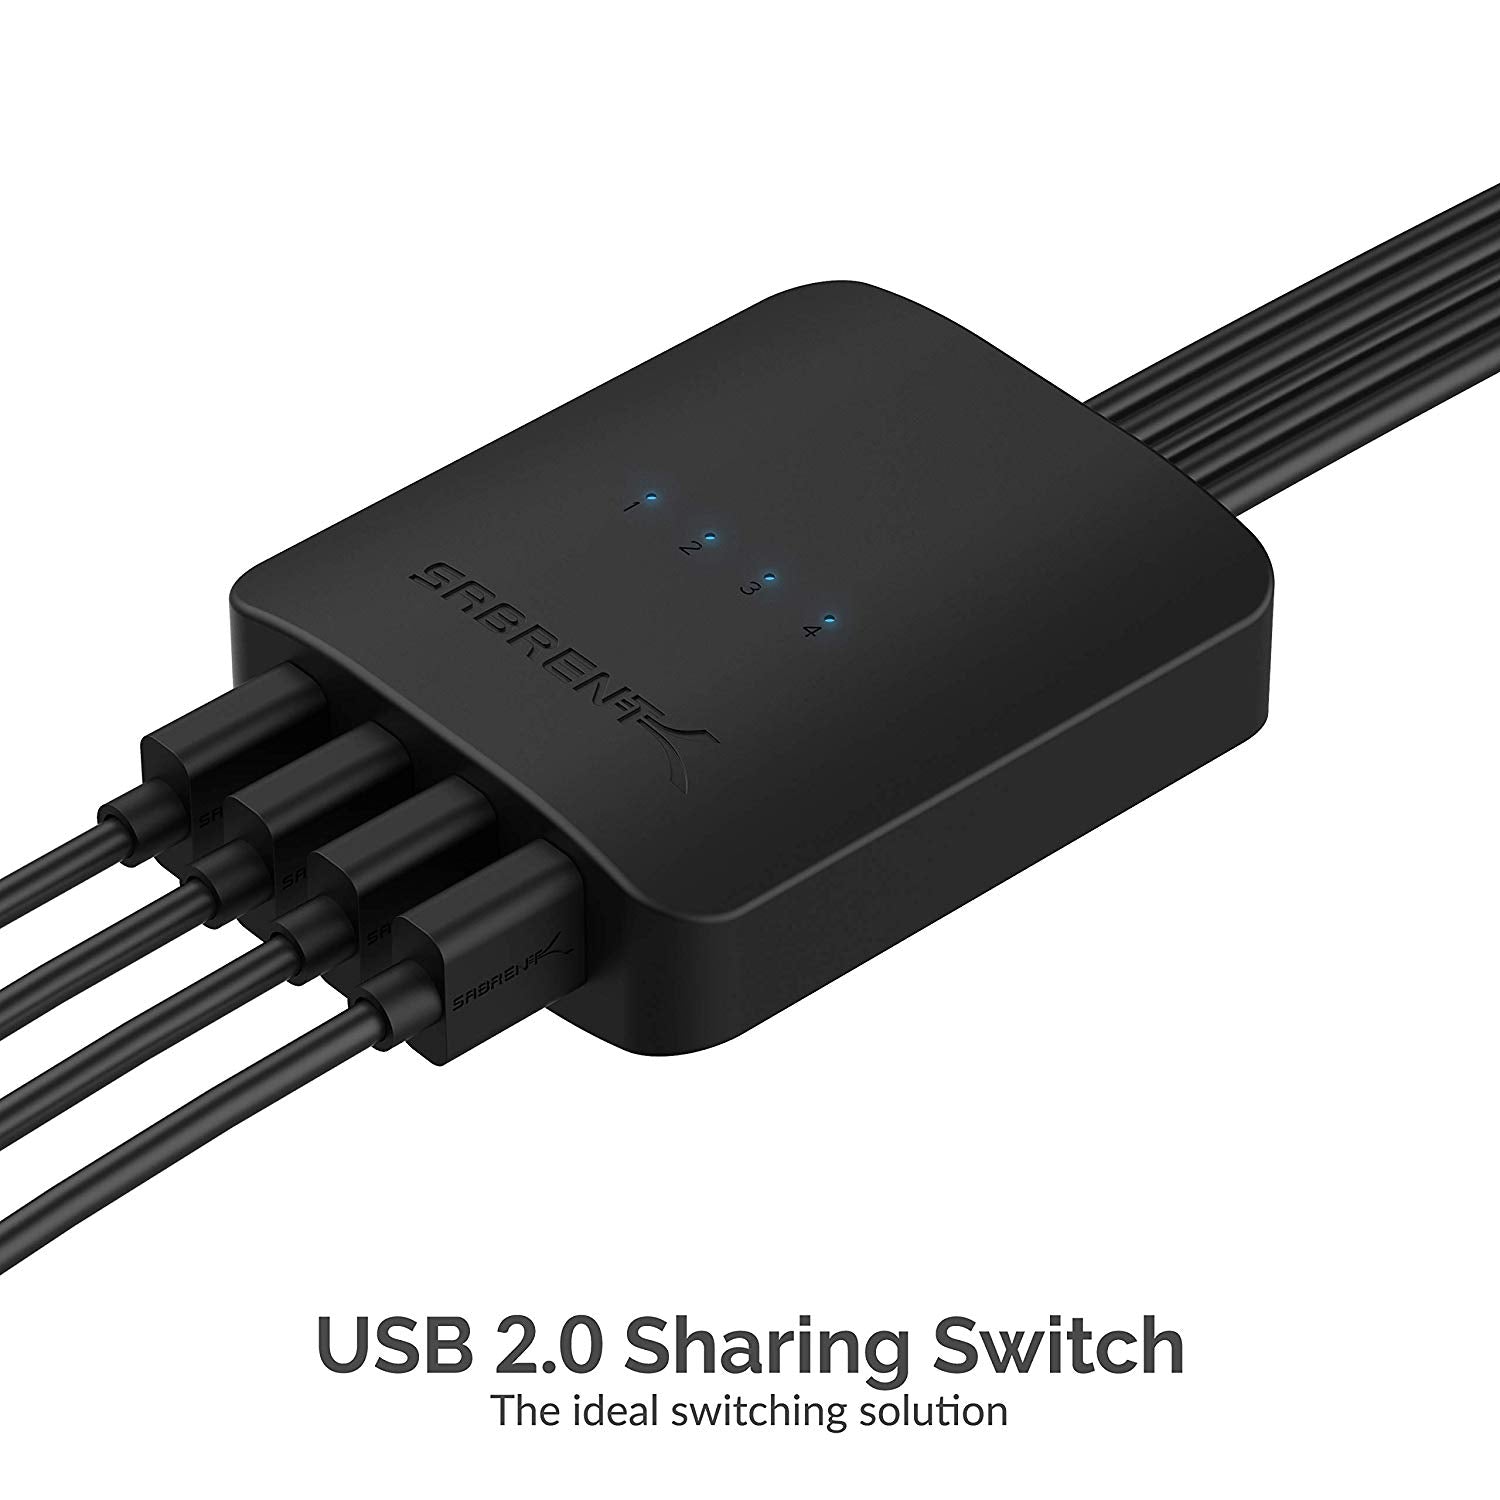 4-Way USB 2.0 Sharing Switch - Sabrent